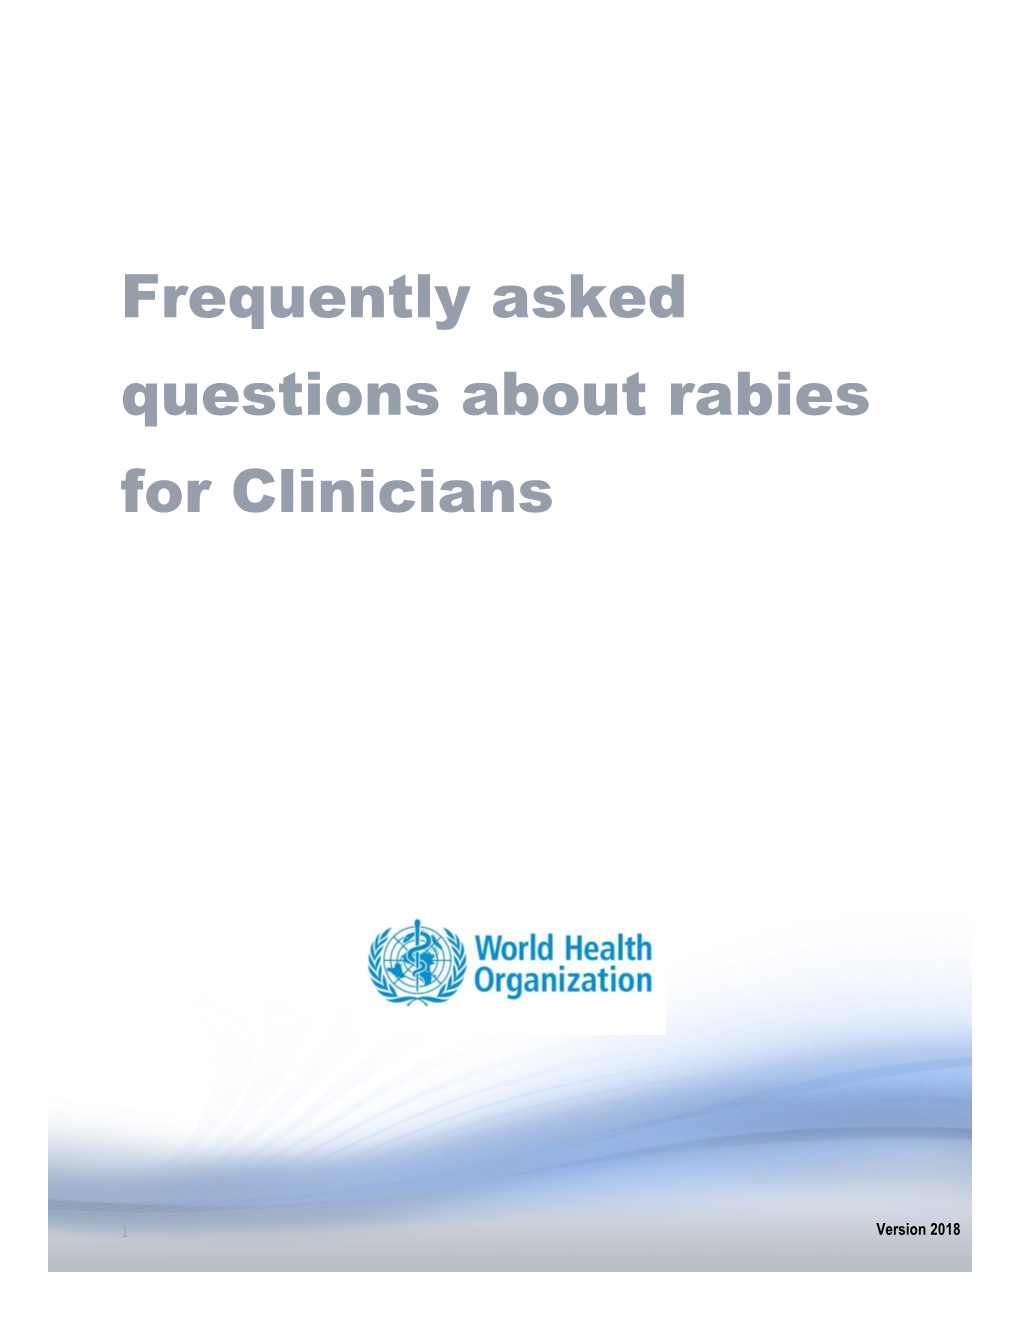 Frequently Asked Questions About Rabies for Clinicians